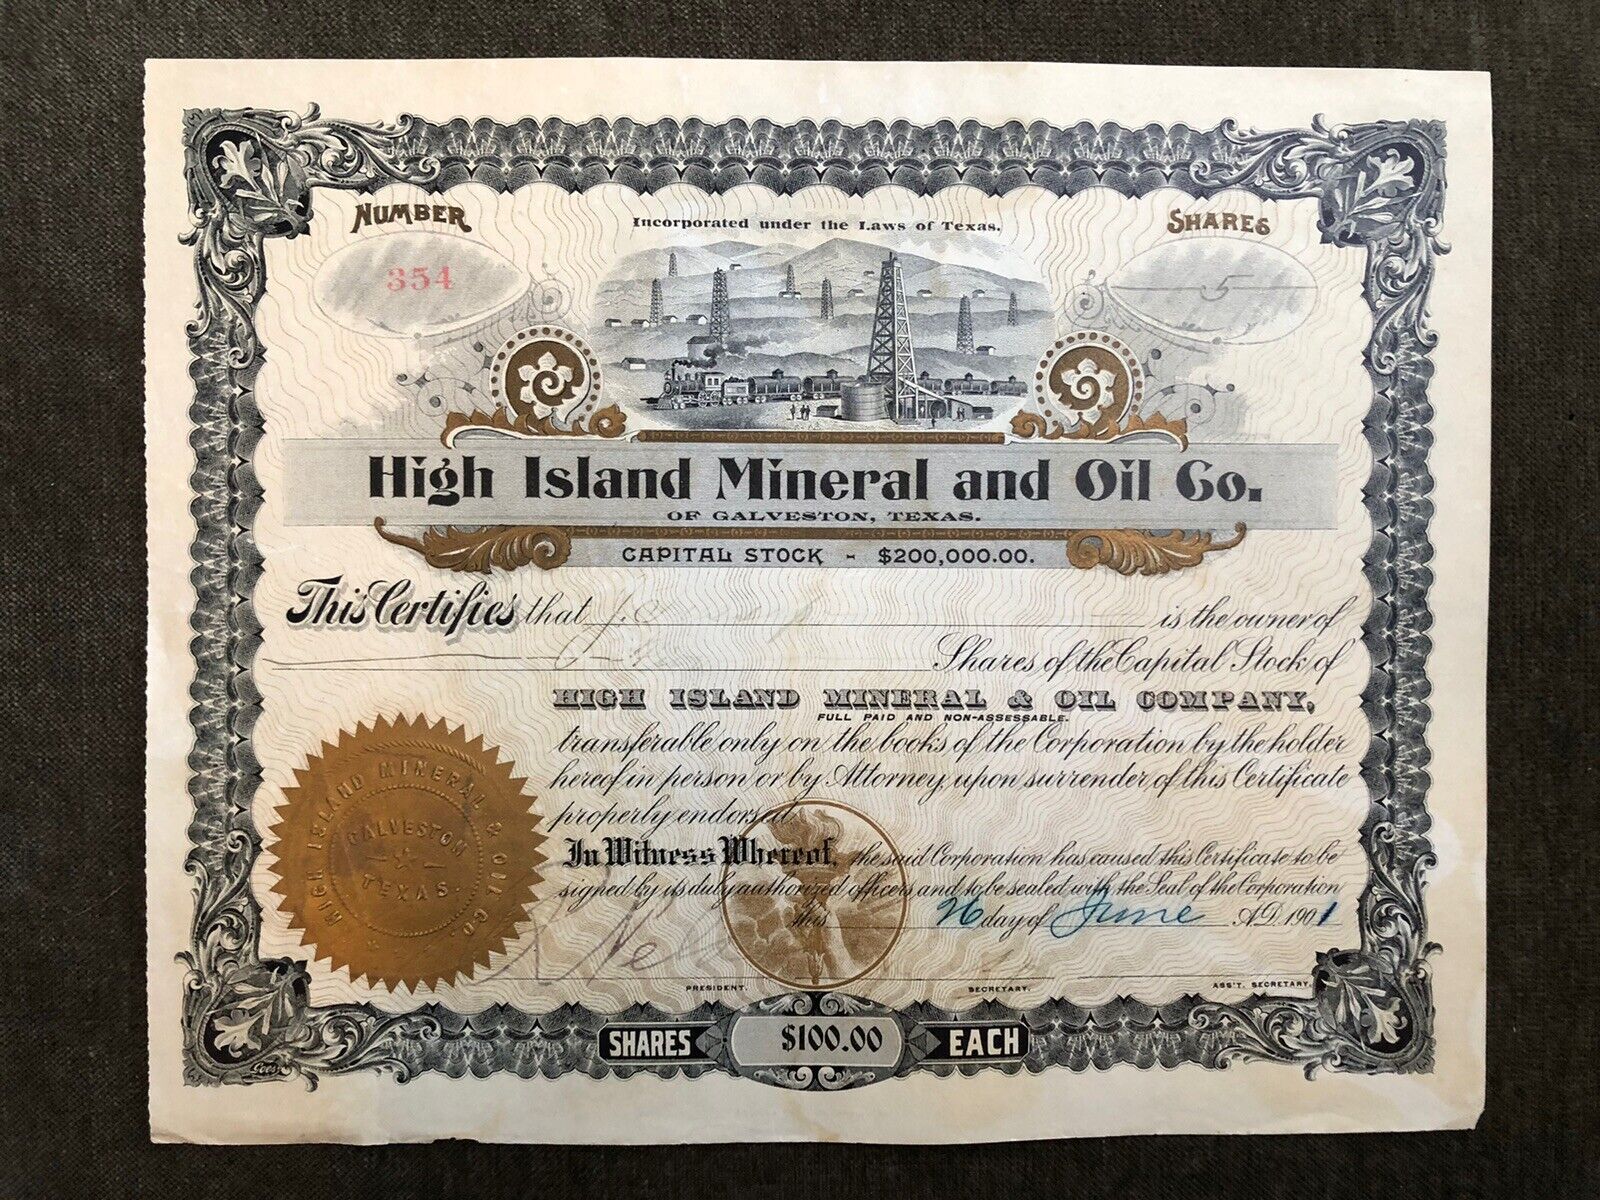 VERY RARE 1901 High Island Mineral and Oil Co. Stock Certificate Galveston Texas